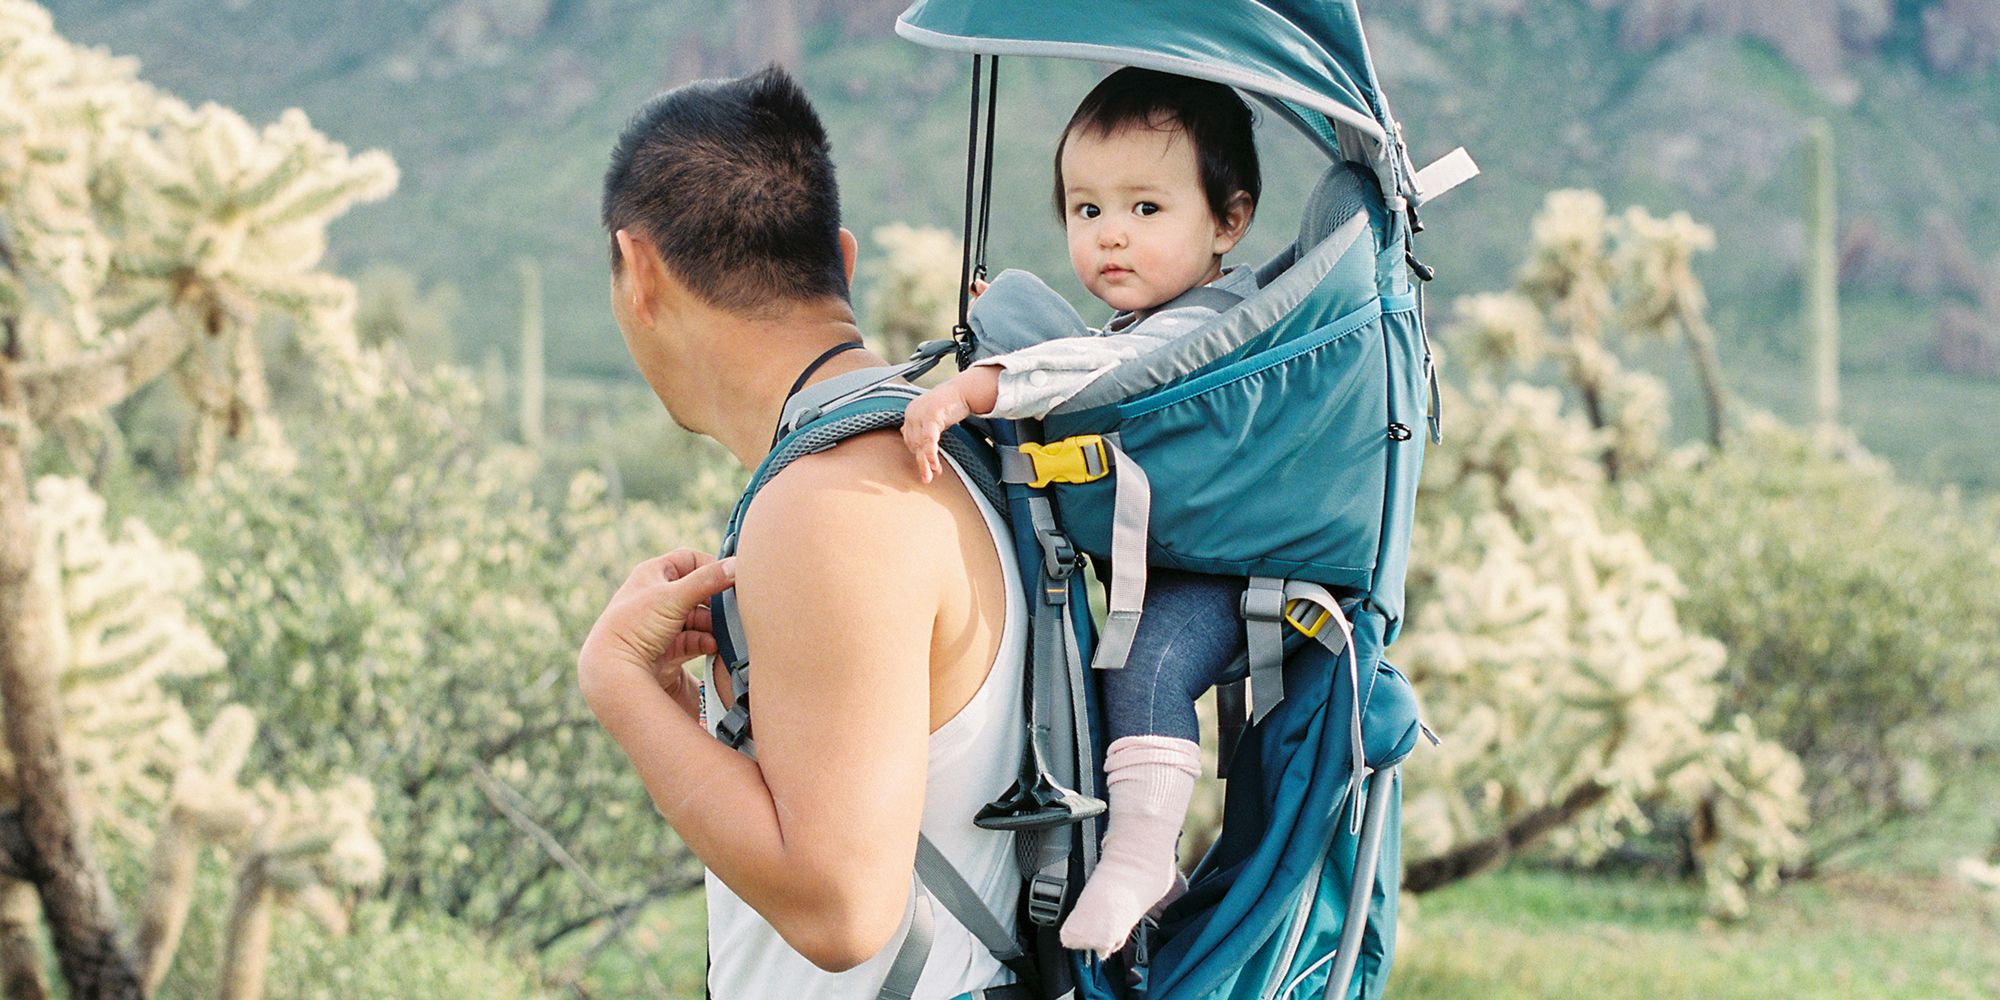 luvdbaby carrier